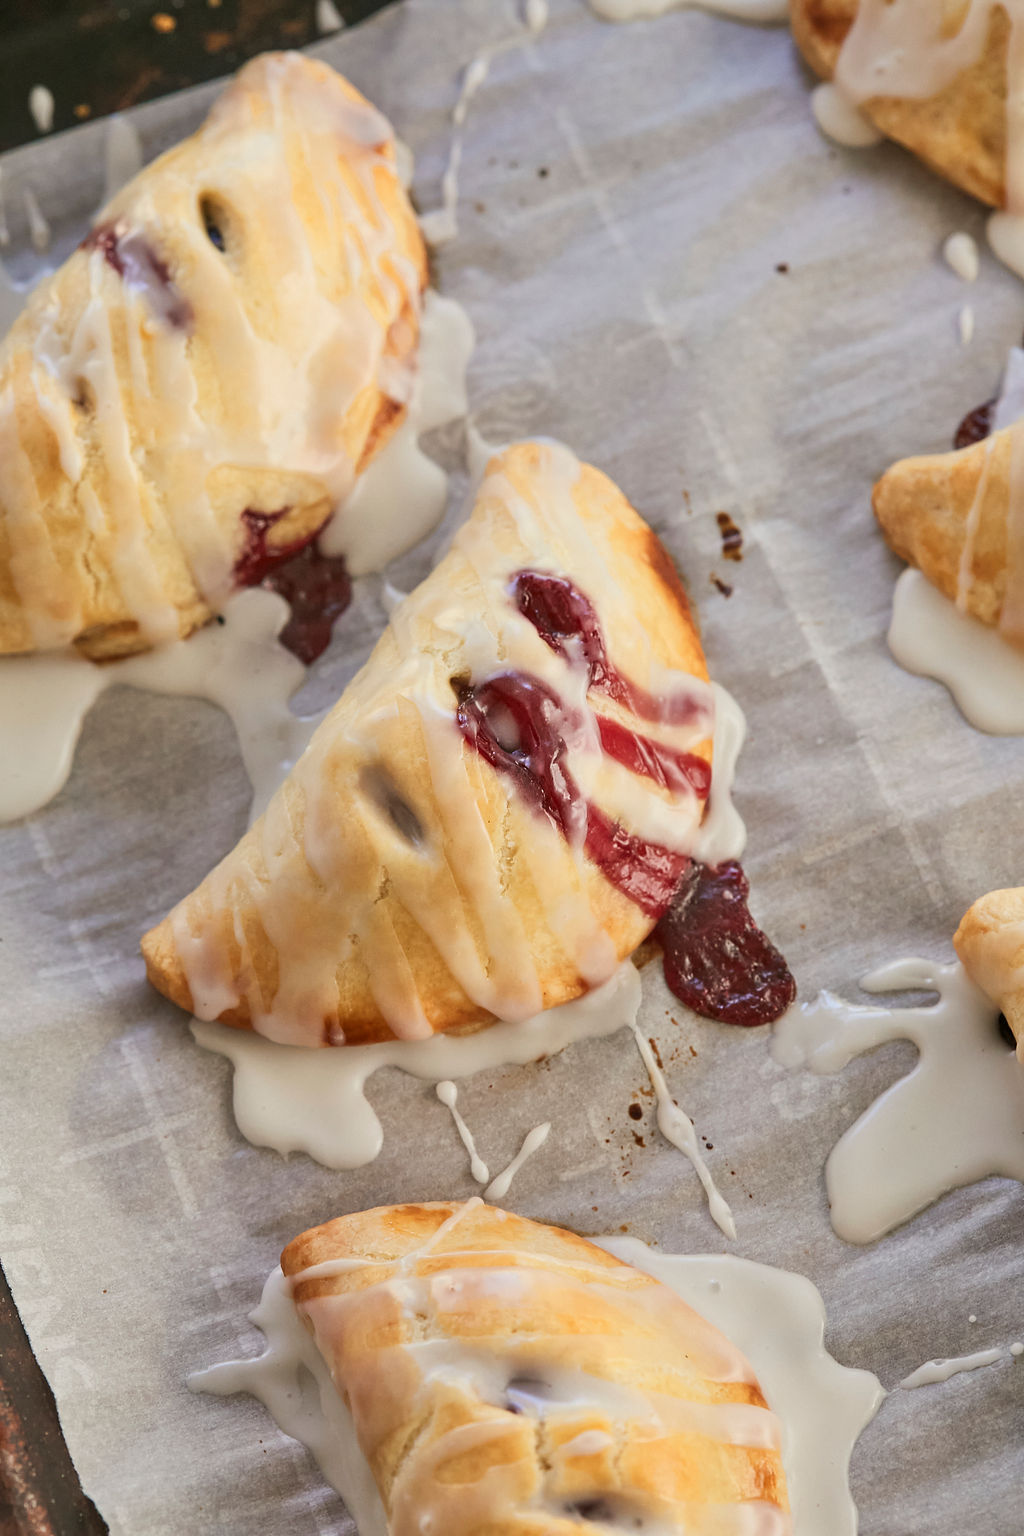 Close up of Cherry Hand Pies, to show texture and consistency.